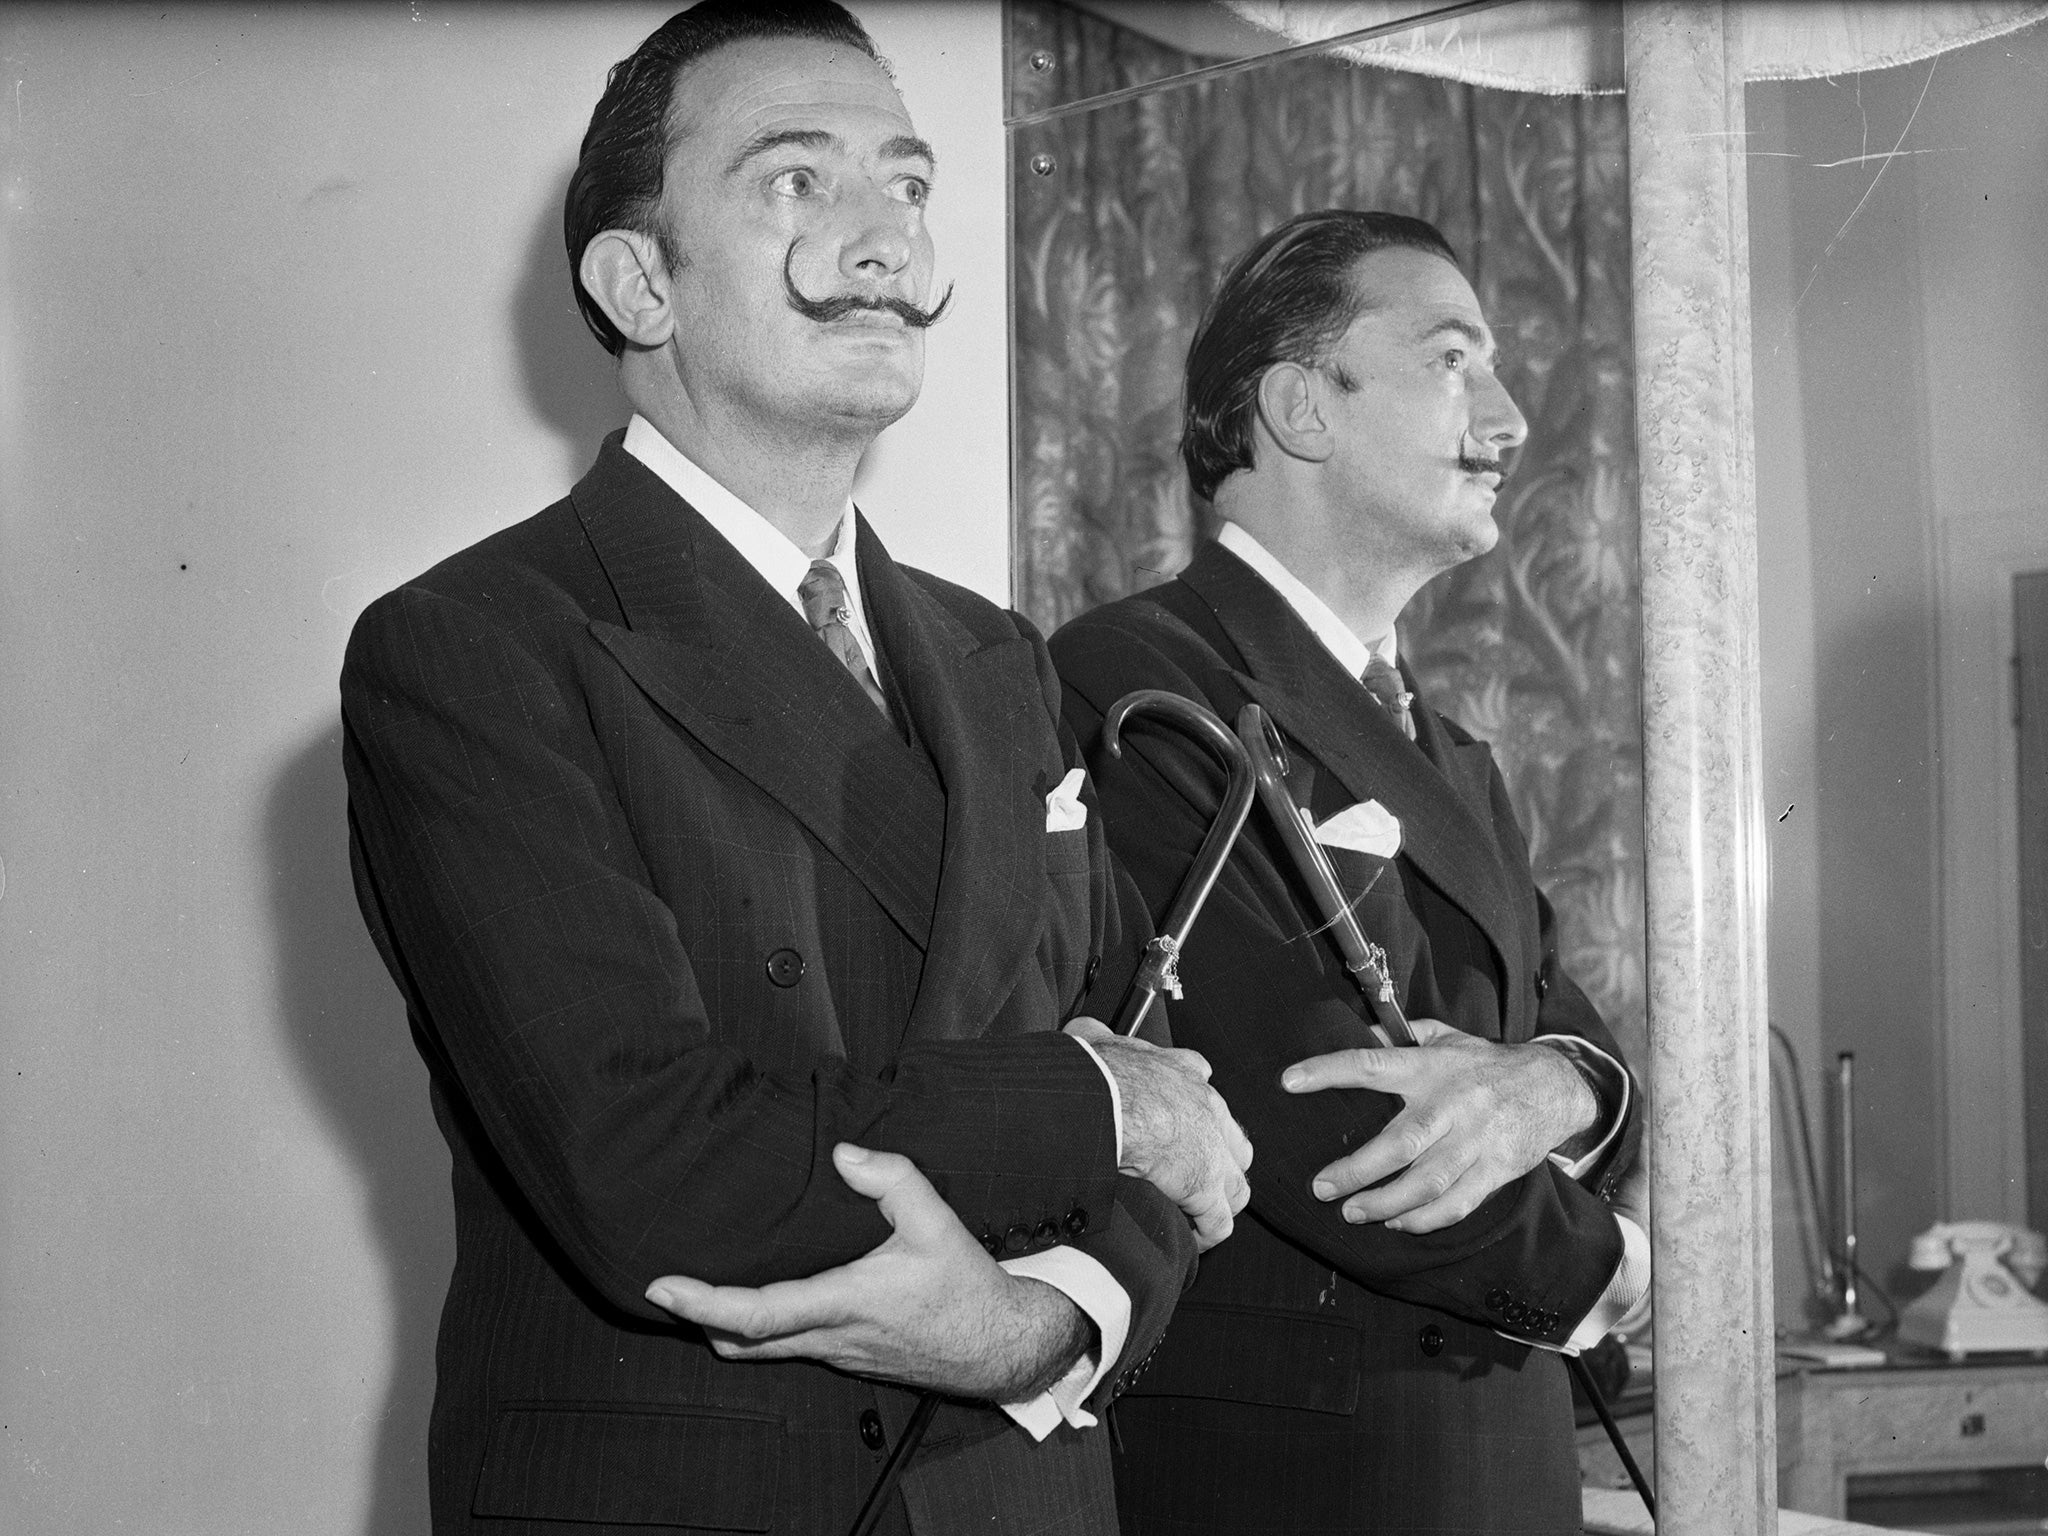 Dali, who has been dead more than 25 years, may have a 59-year-old daughter